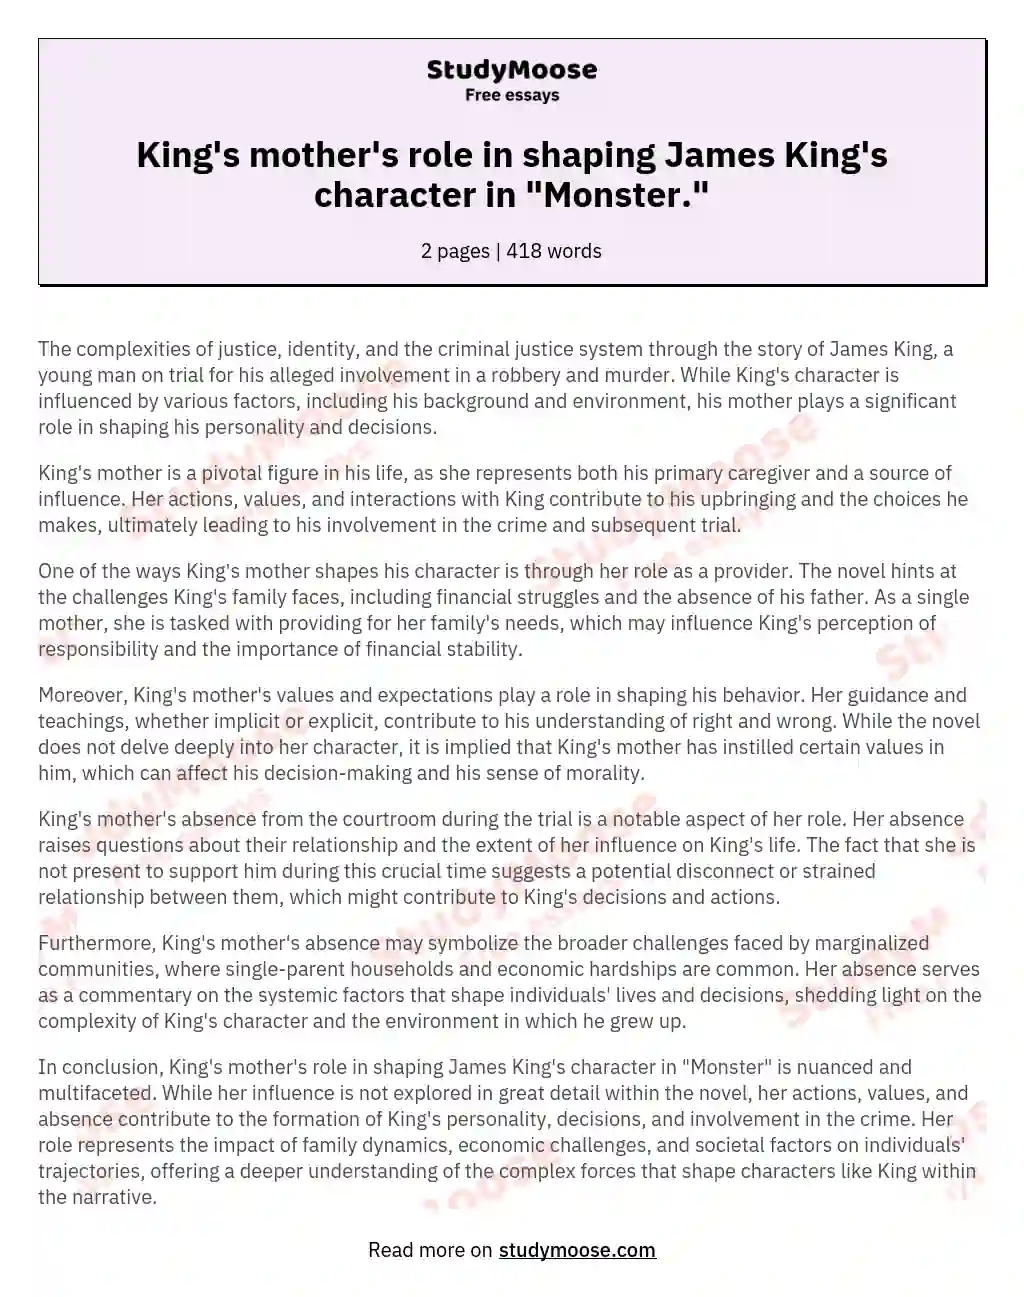 King's mother's role in shaping James King's character in "Monster." essay